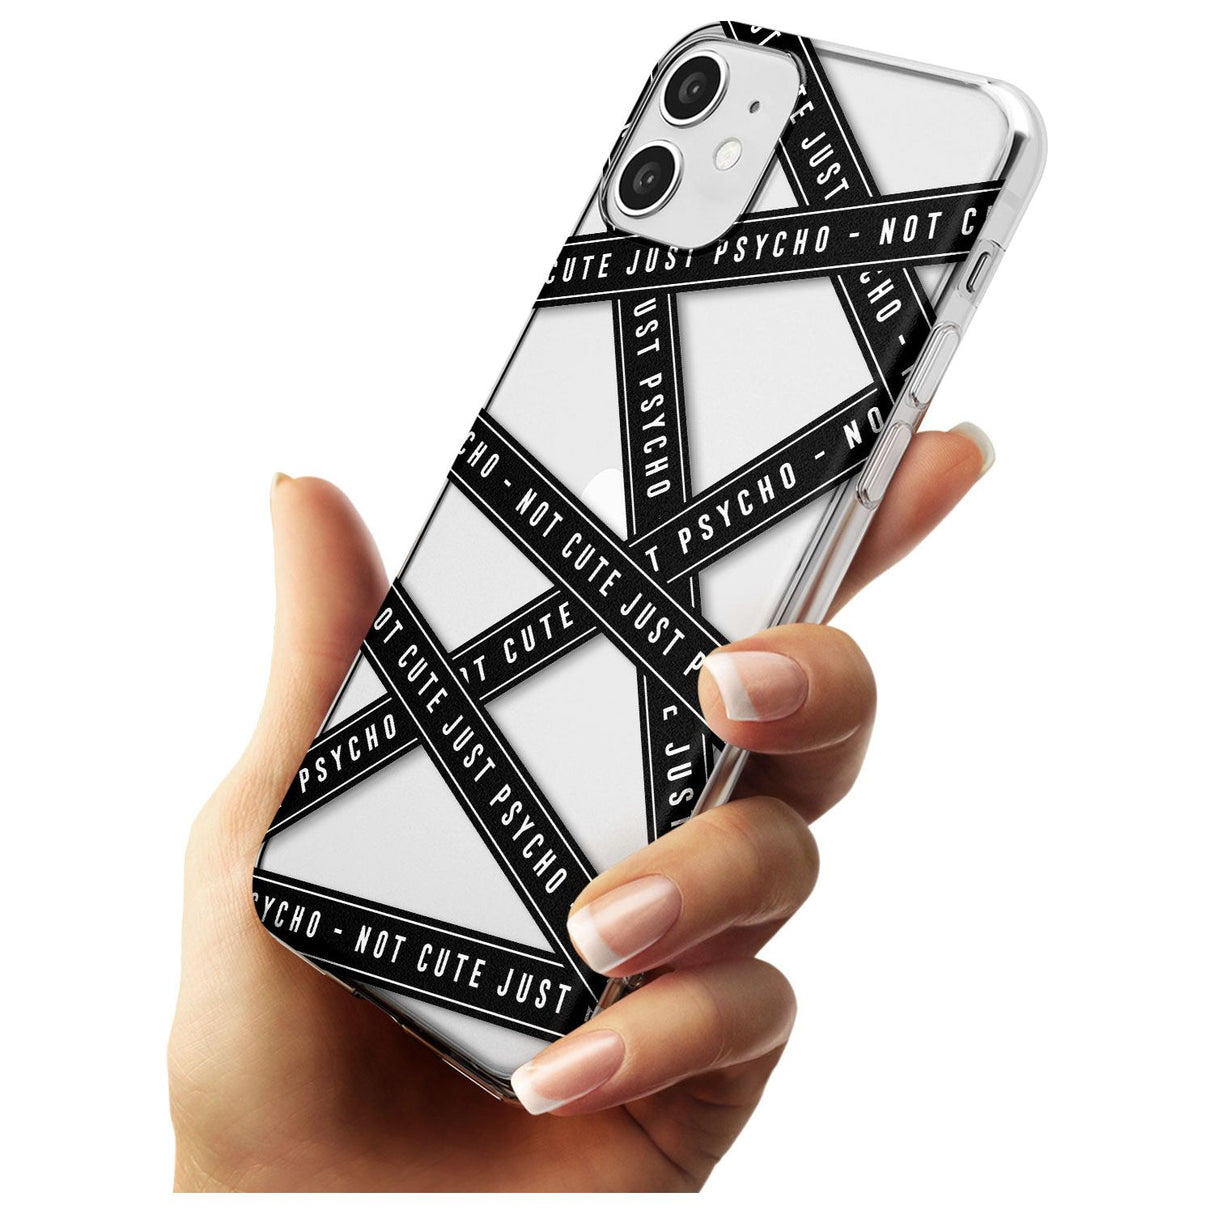 Caution Tape (Clear) Not Cute Just Psycho Slim TPU Phone Case for iPhone 11